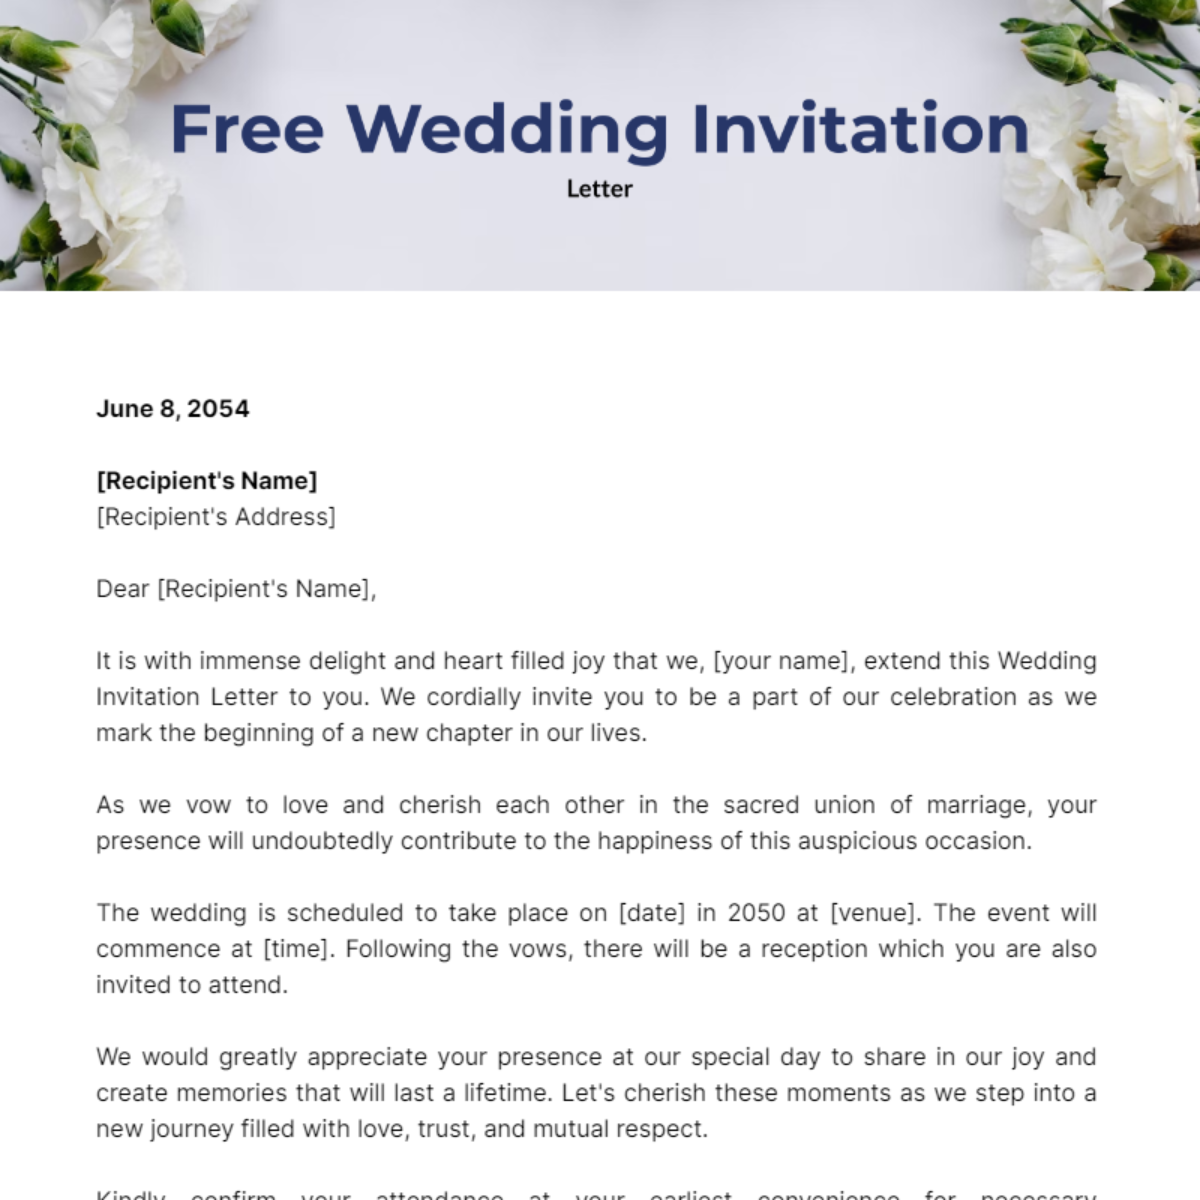 FREE Invitation Letter Templates Examples Edit Online Download